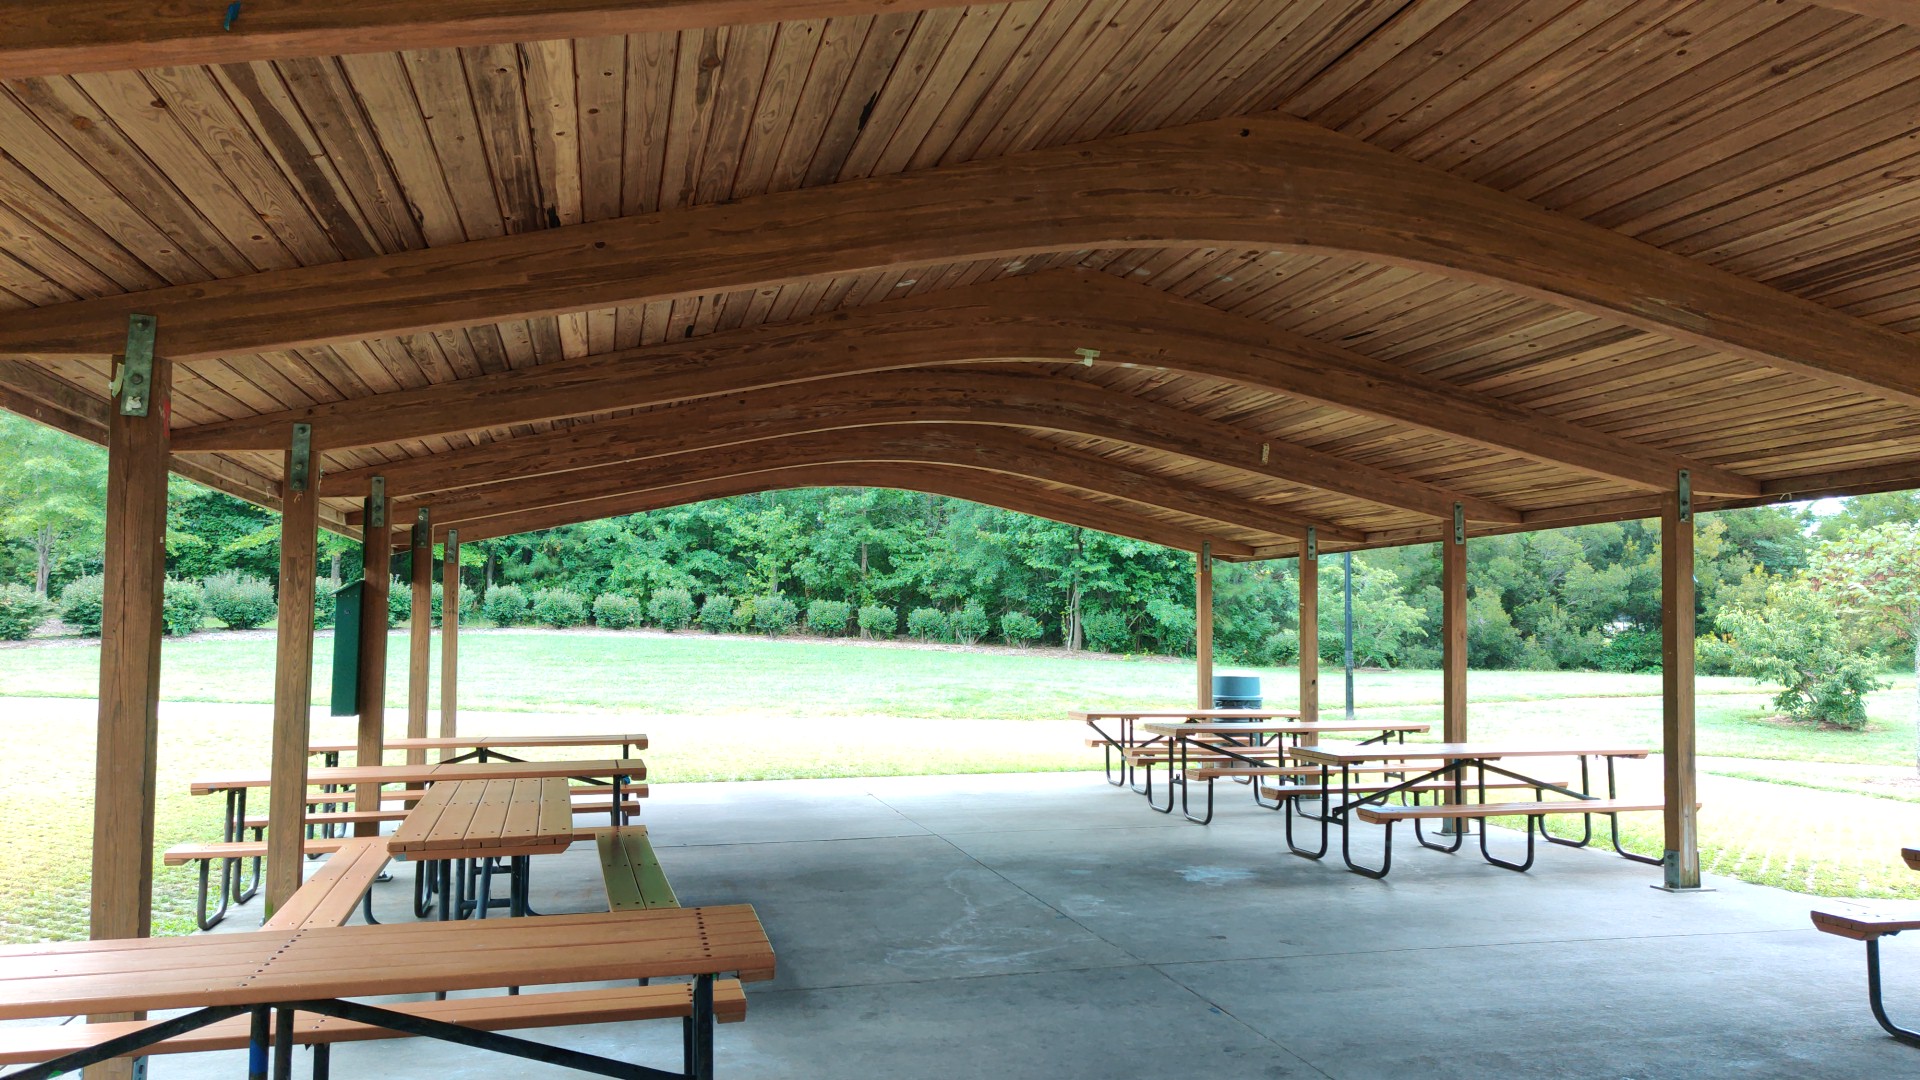 Community grills and picnic tables